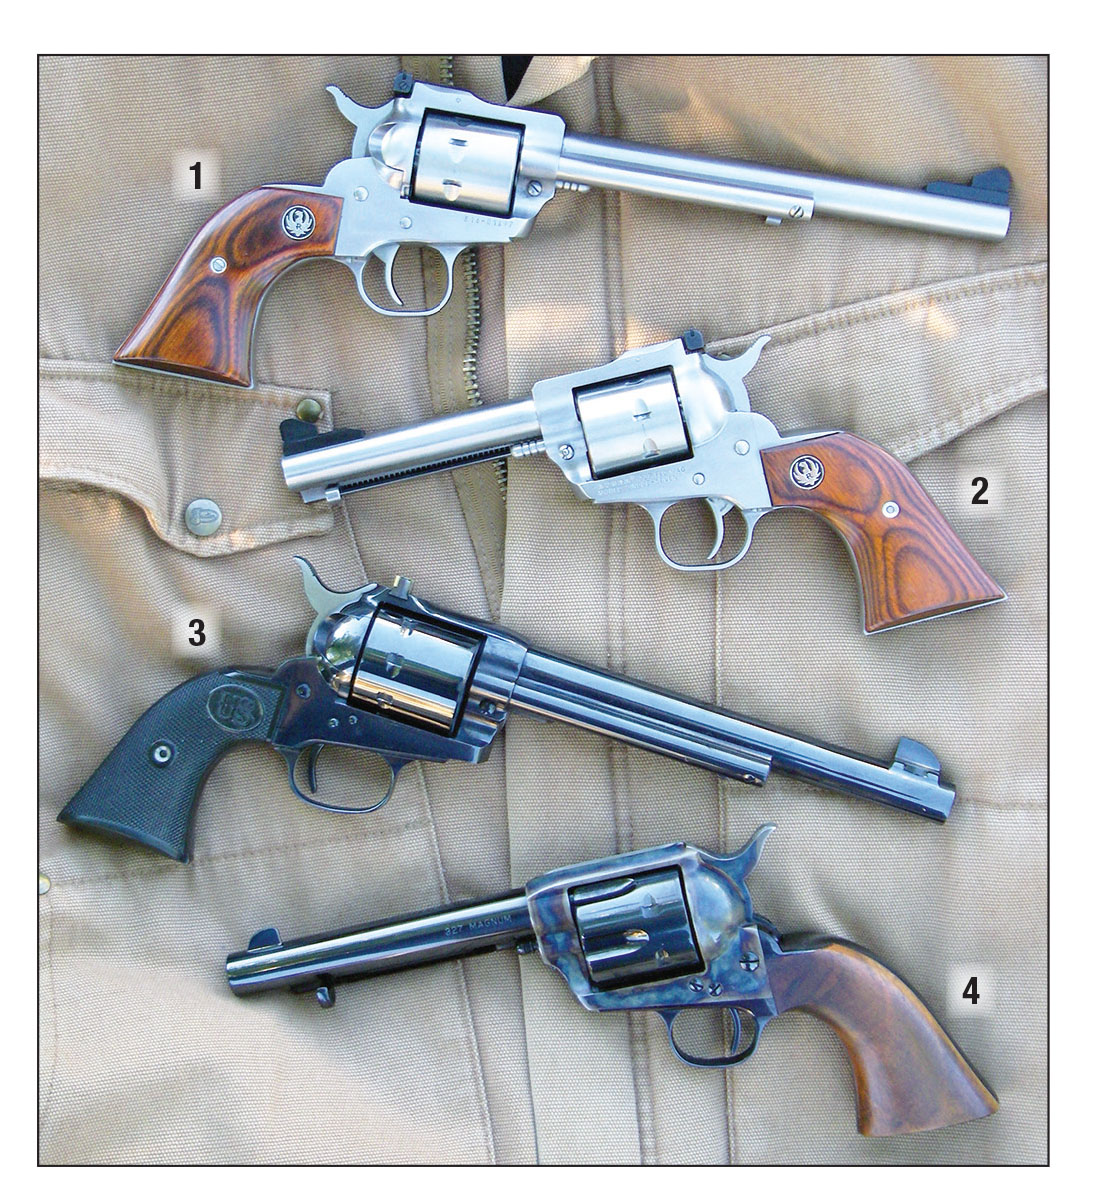 While the .327 Federal Magnum is available in several small revolvers intended for personal protection, Brian feels that it is at its best as a field cartridge in larger revolvers. Examples include the (1) Ruger Single-Seven (7½-inch barrel), (2) Ruger Single-Seven (45⁄8-inch barrel), (3) USFA eight-shot Sparrow Hawk (7½-inch barrel) and a (4) USFA Pre War (5½-inch barrel).